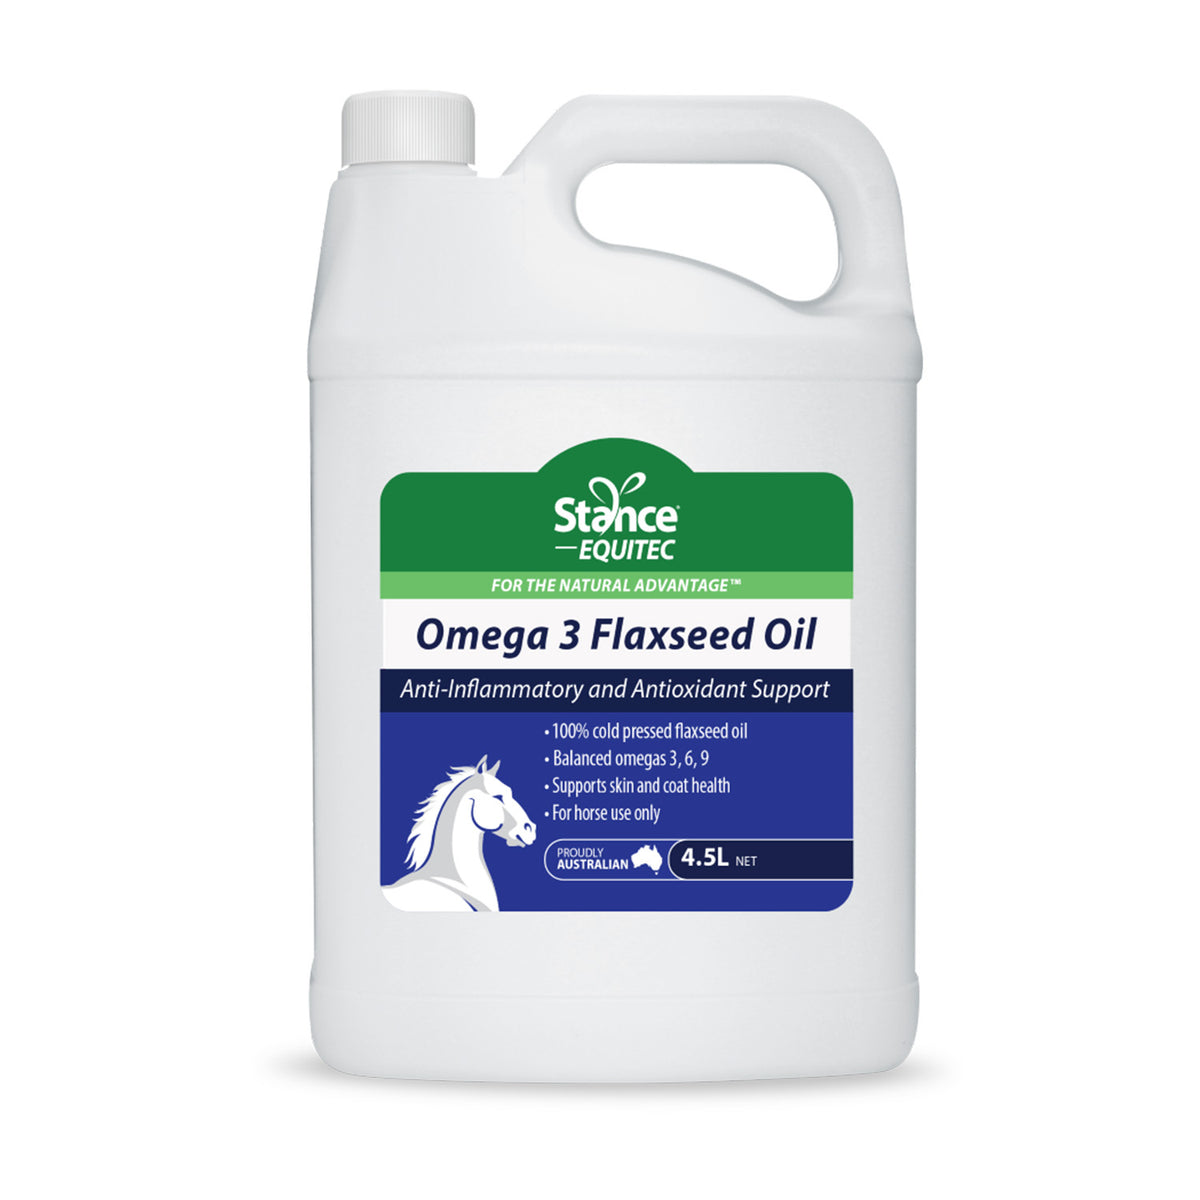 Stance Equitec Omega 3 Flaxseed Oil 4.5L